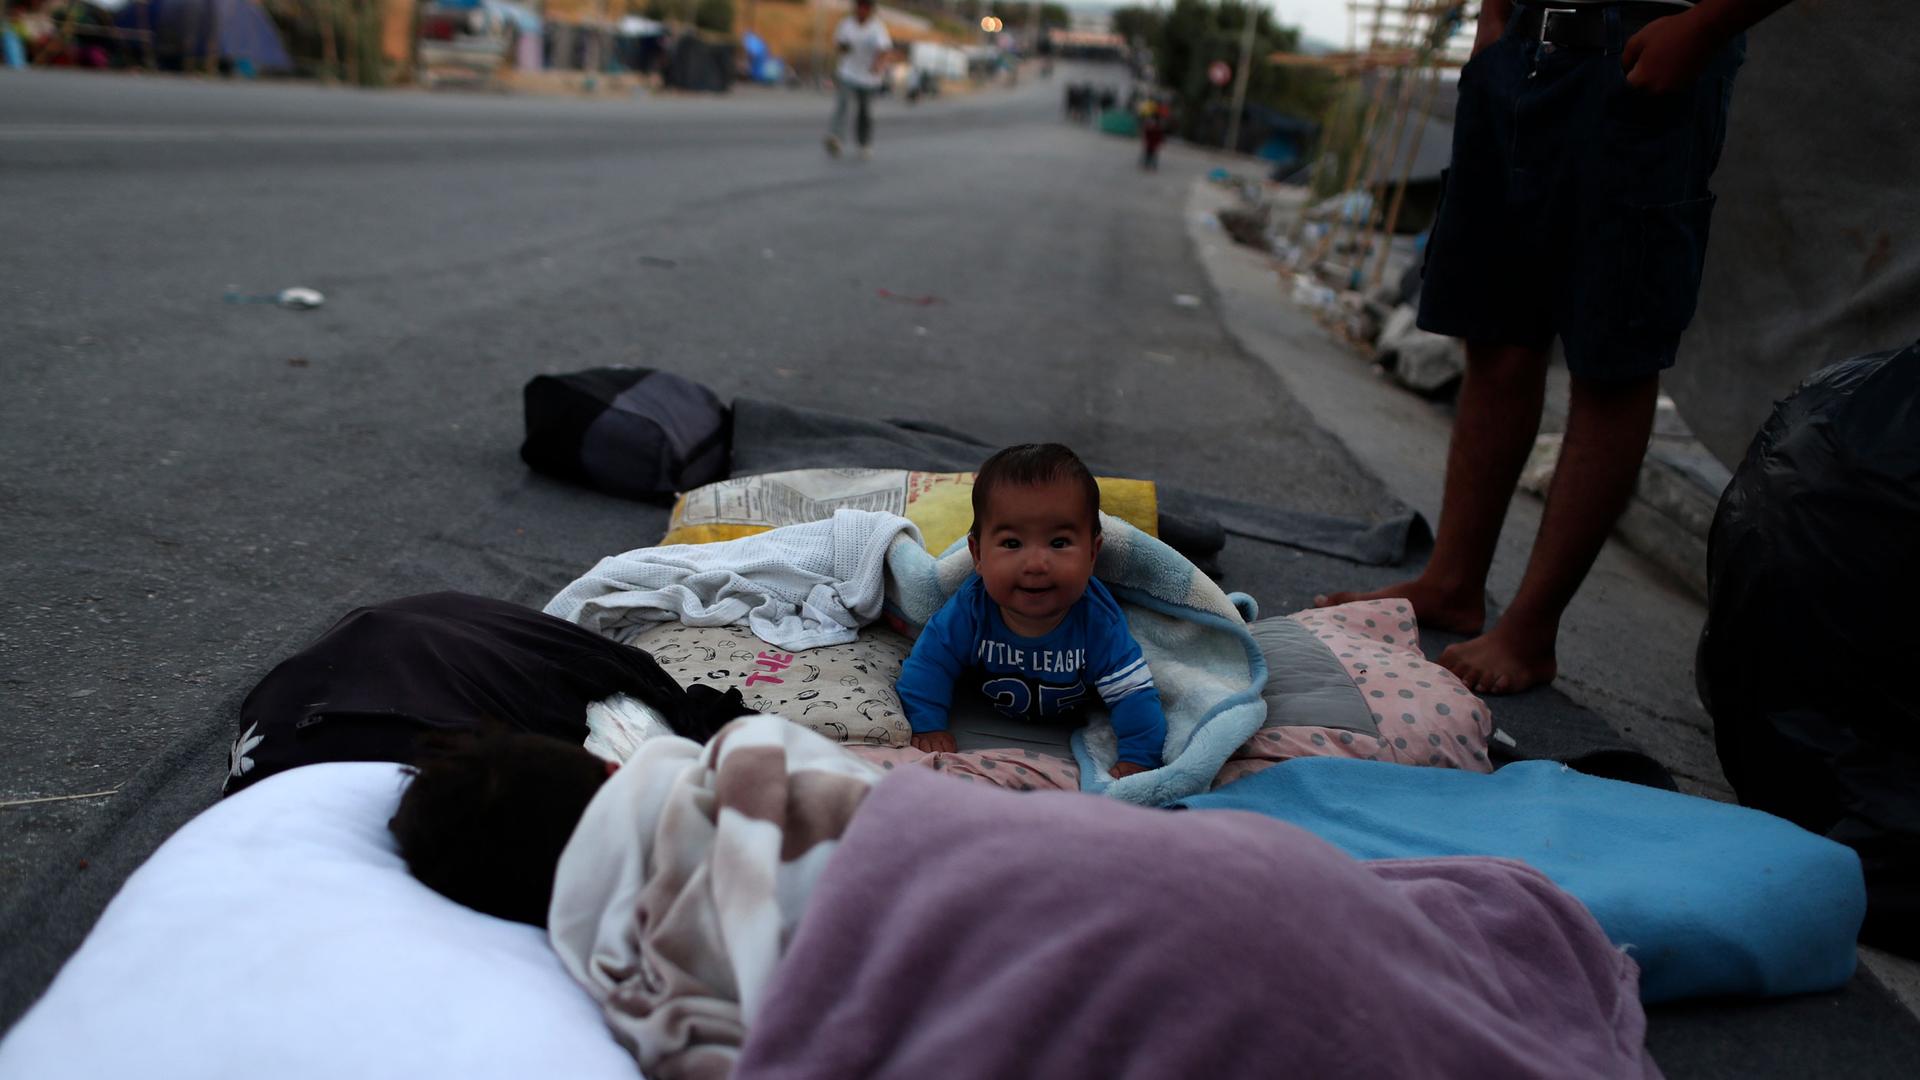 A small baby is shown looking at the camera and crawling on blankets out on a street.